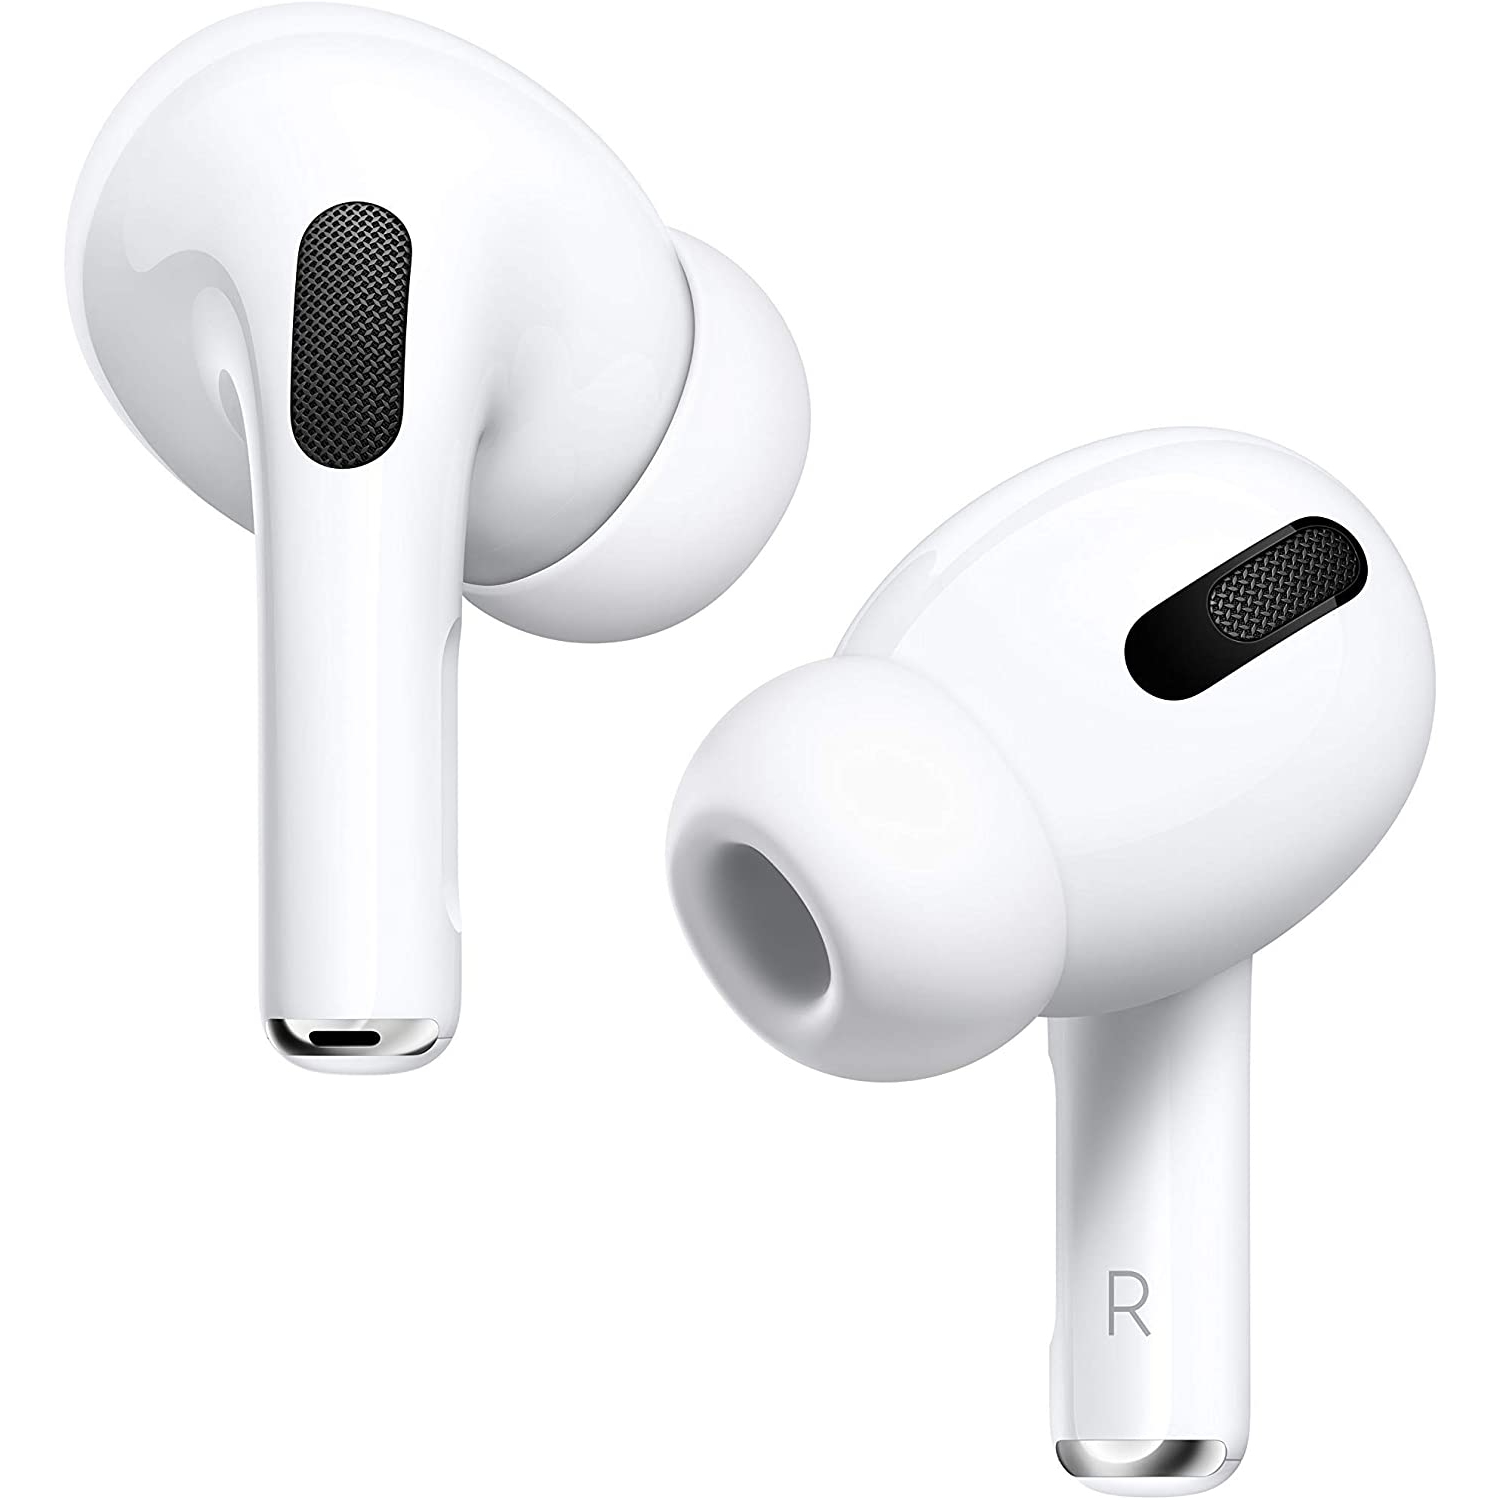 Apple - AirPods Pro - In-Ear - Noise Cancelling Wireless 